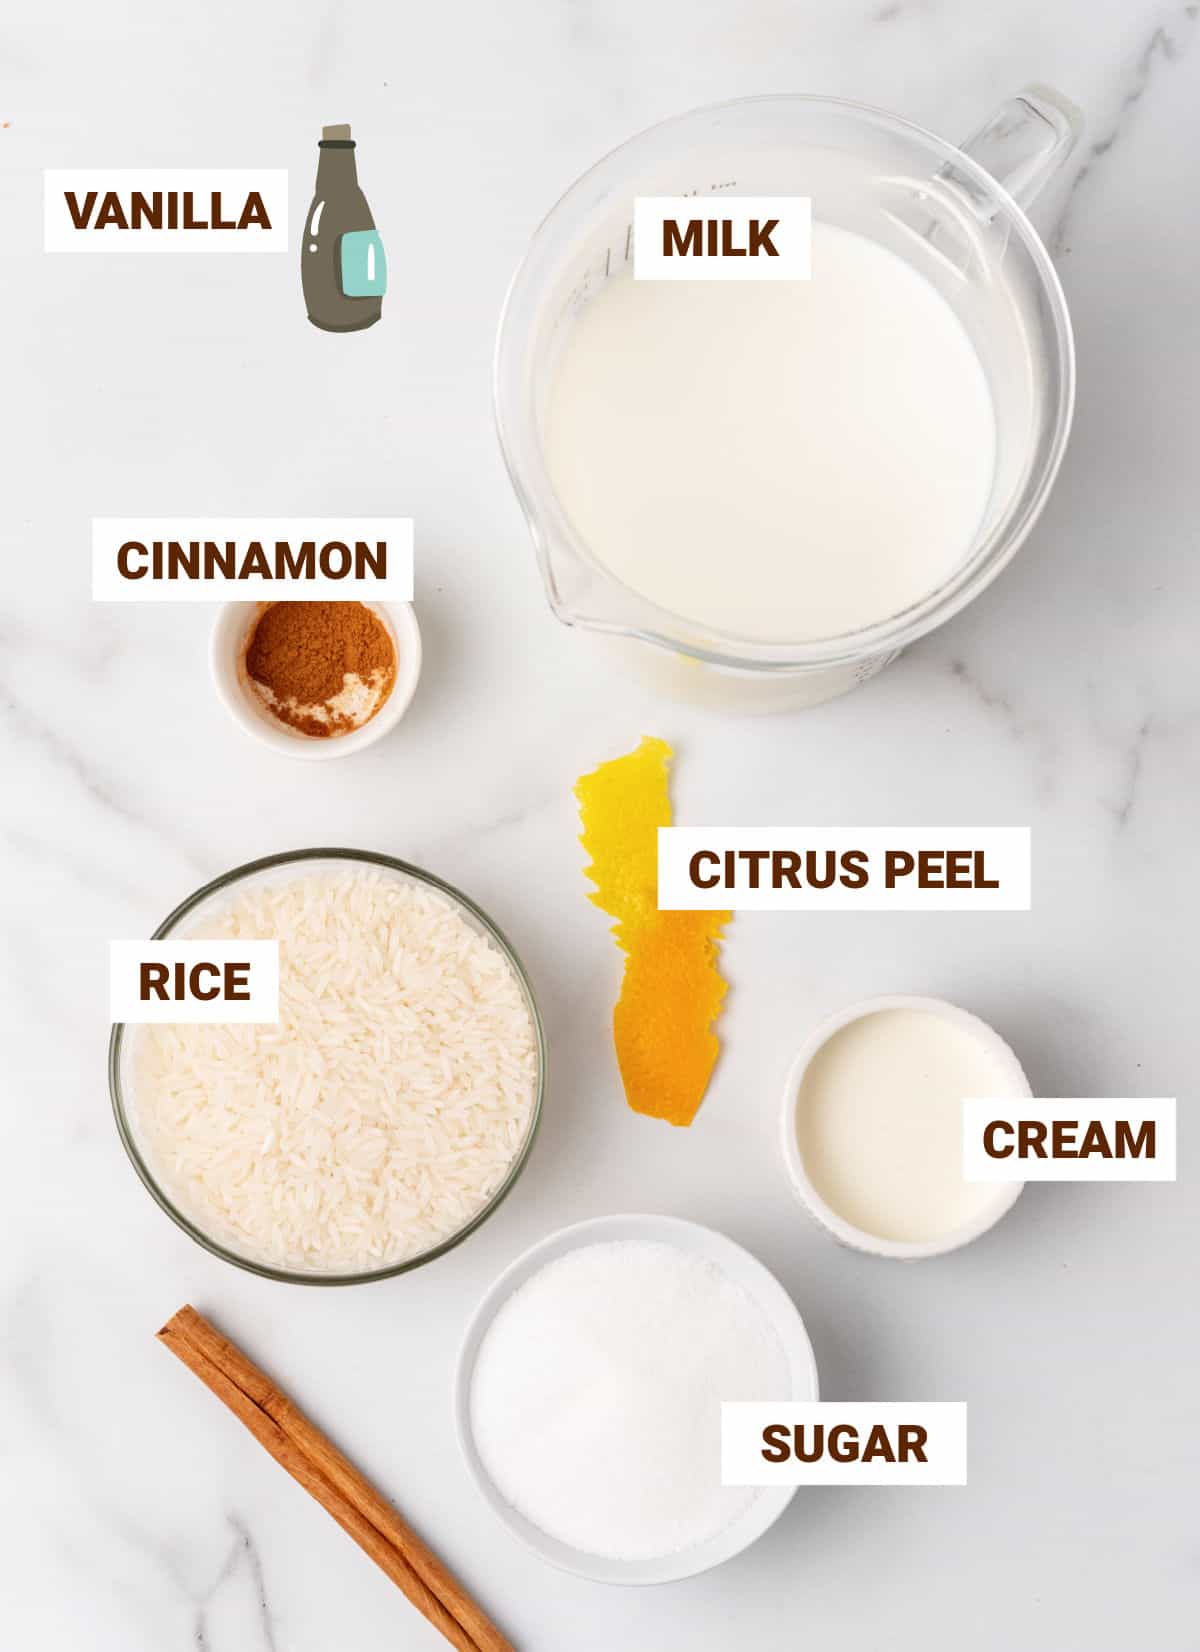 Ingredients for cinnamon rice pudding in bowls on white marble surface, including citrus peel, sugar, milk, vanilla, cream, cinnamon stick.